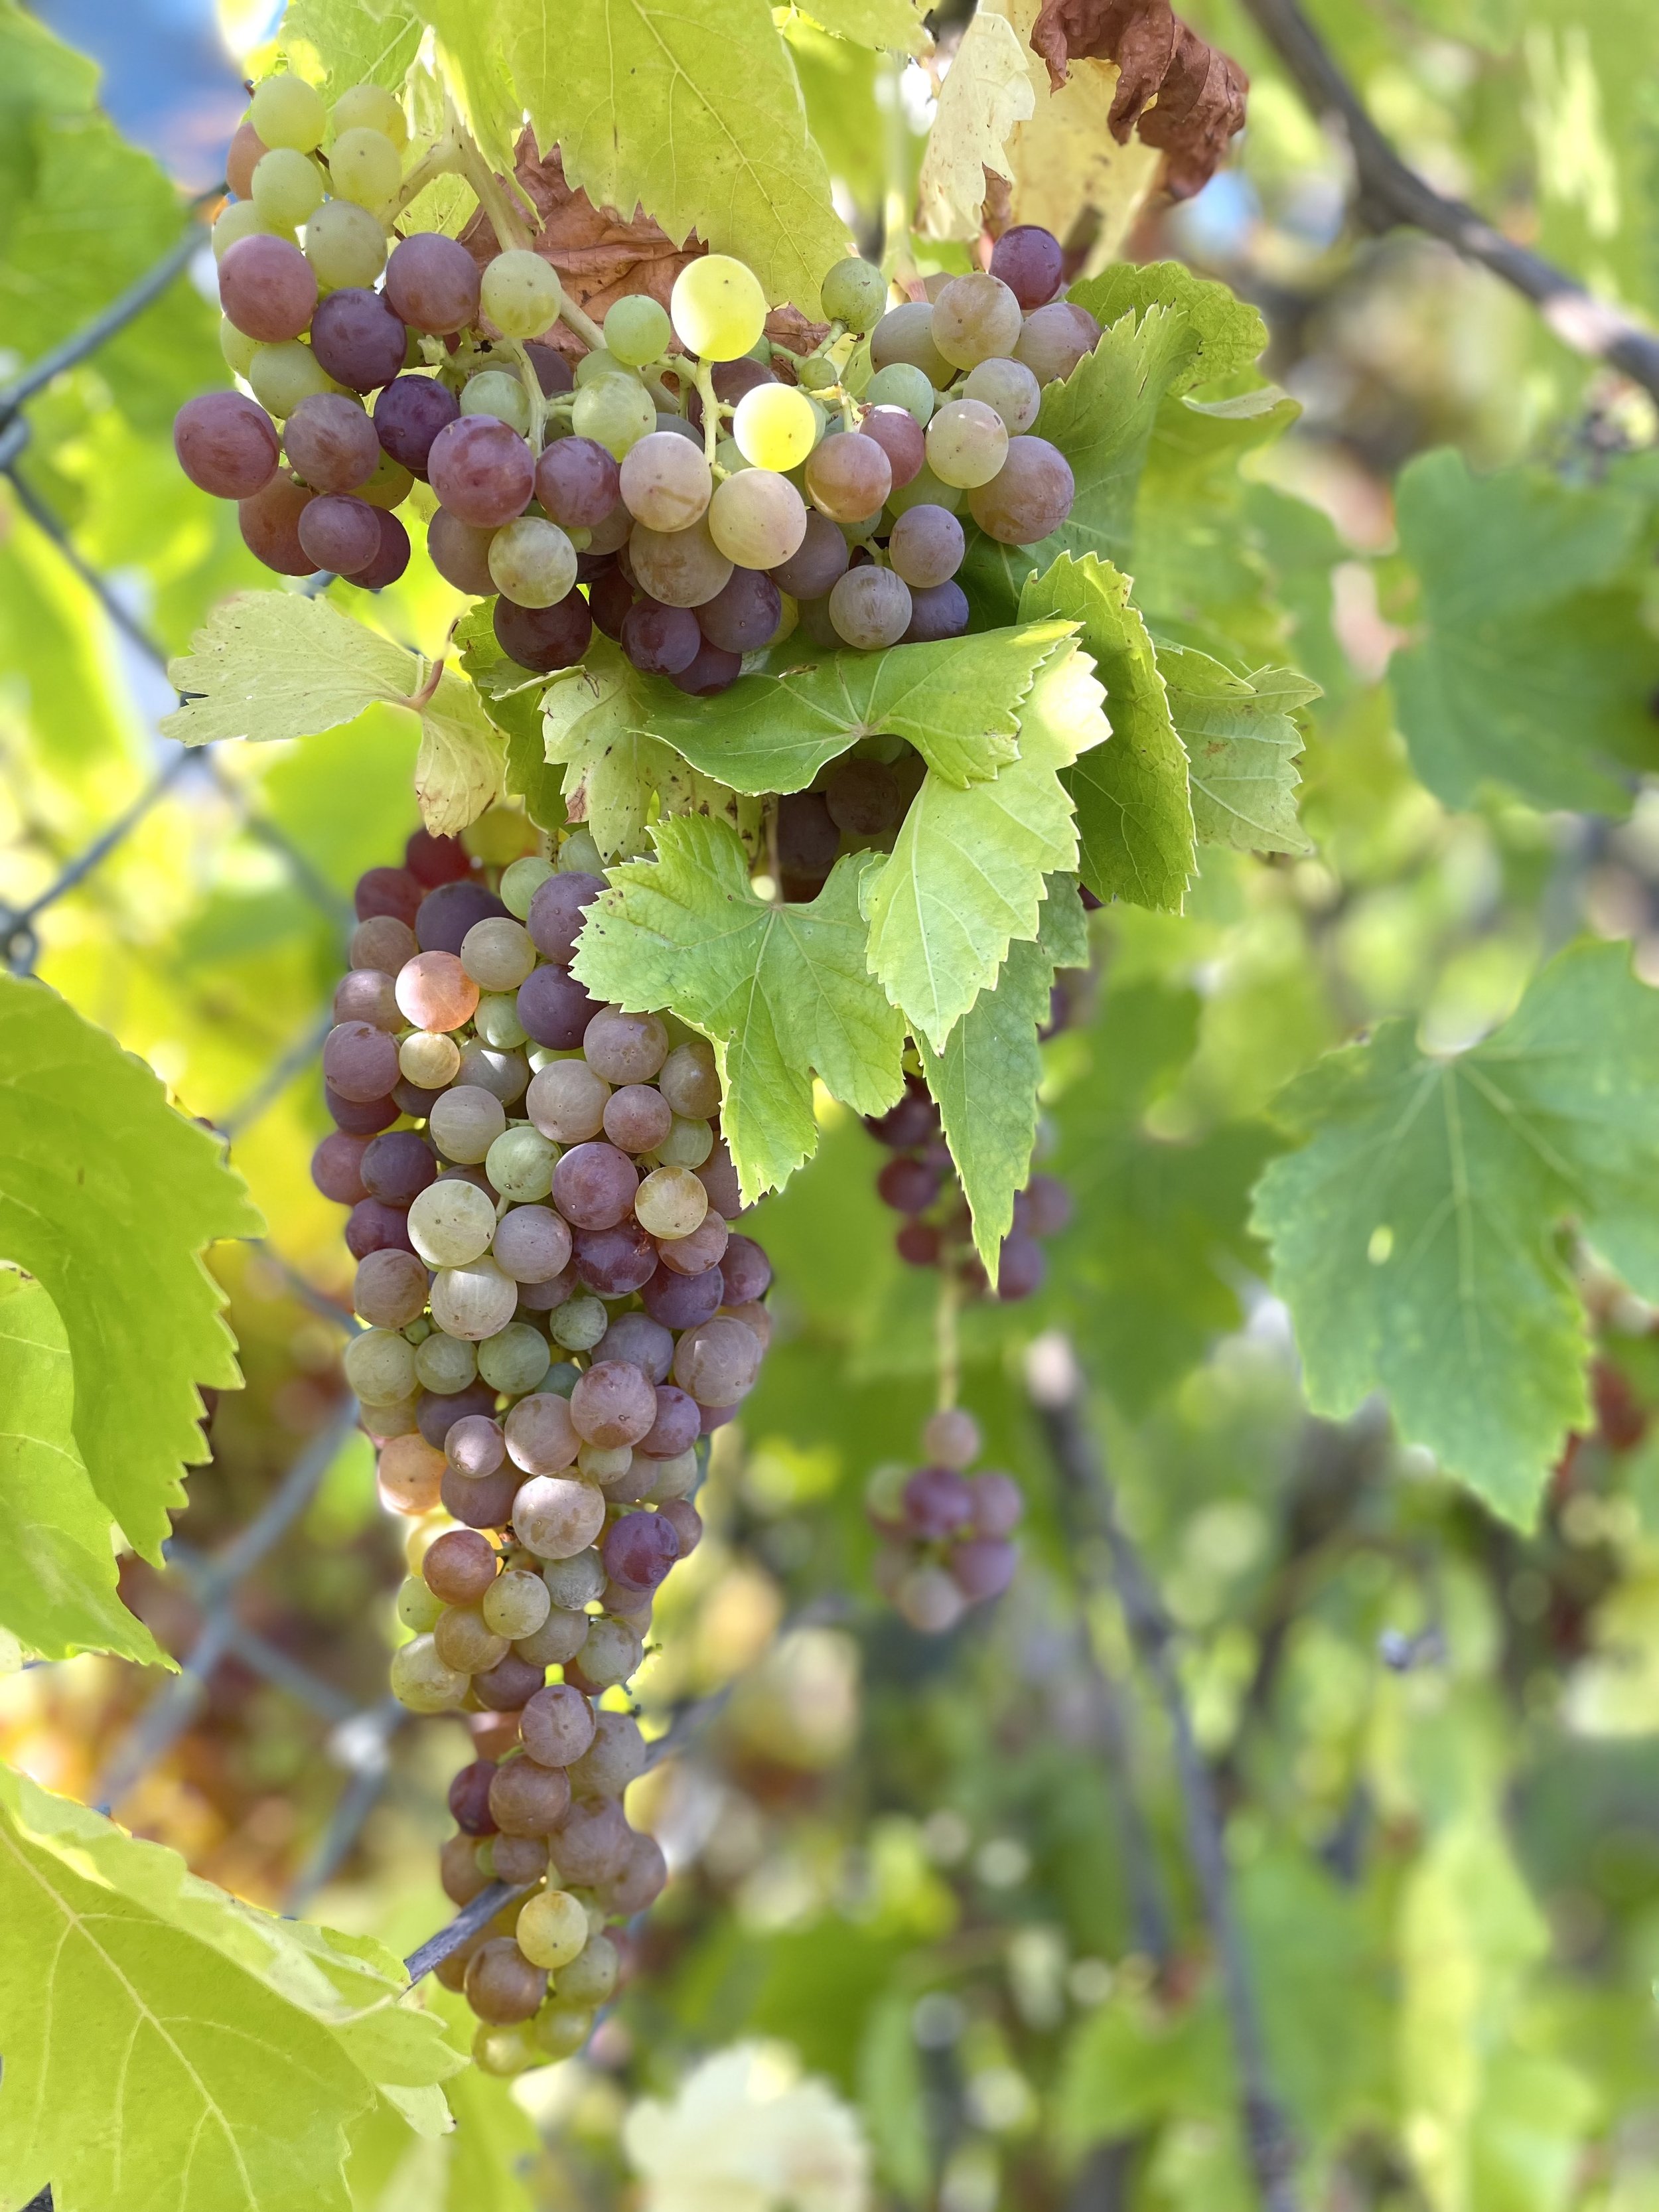 share: grapes (July 17)